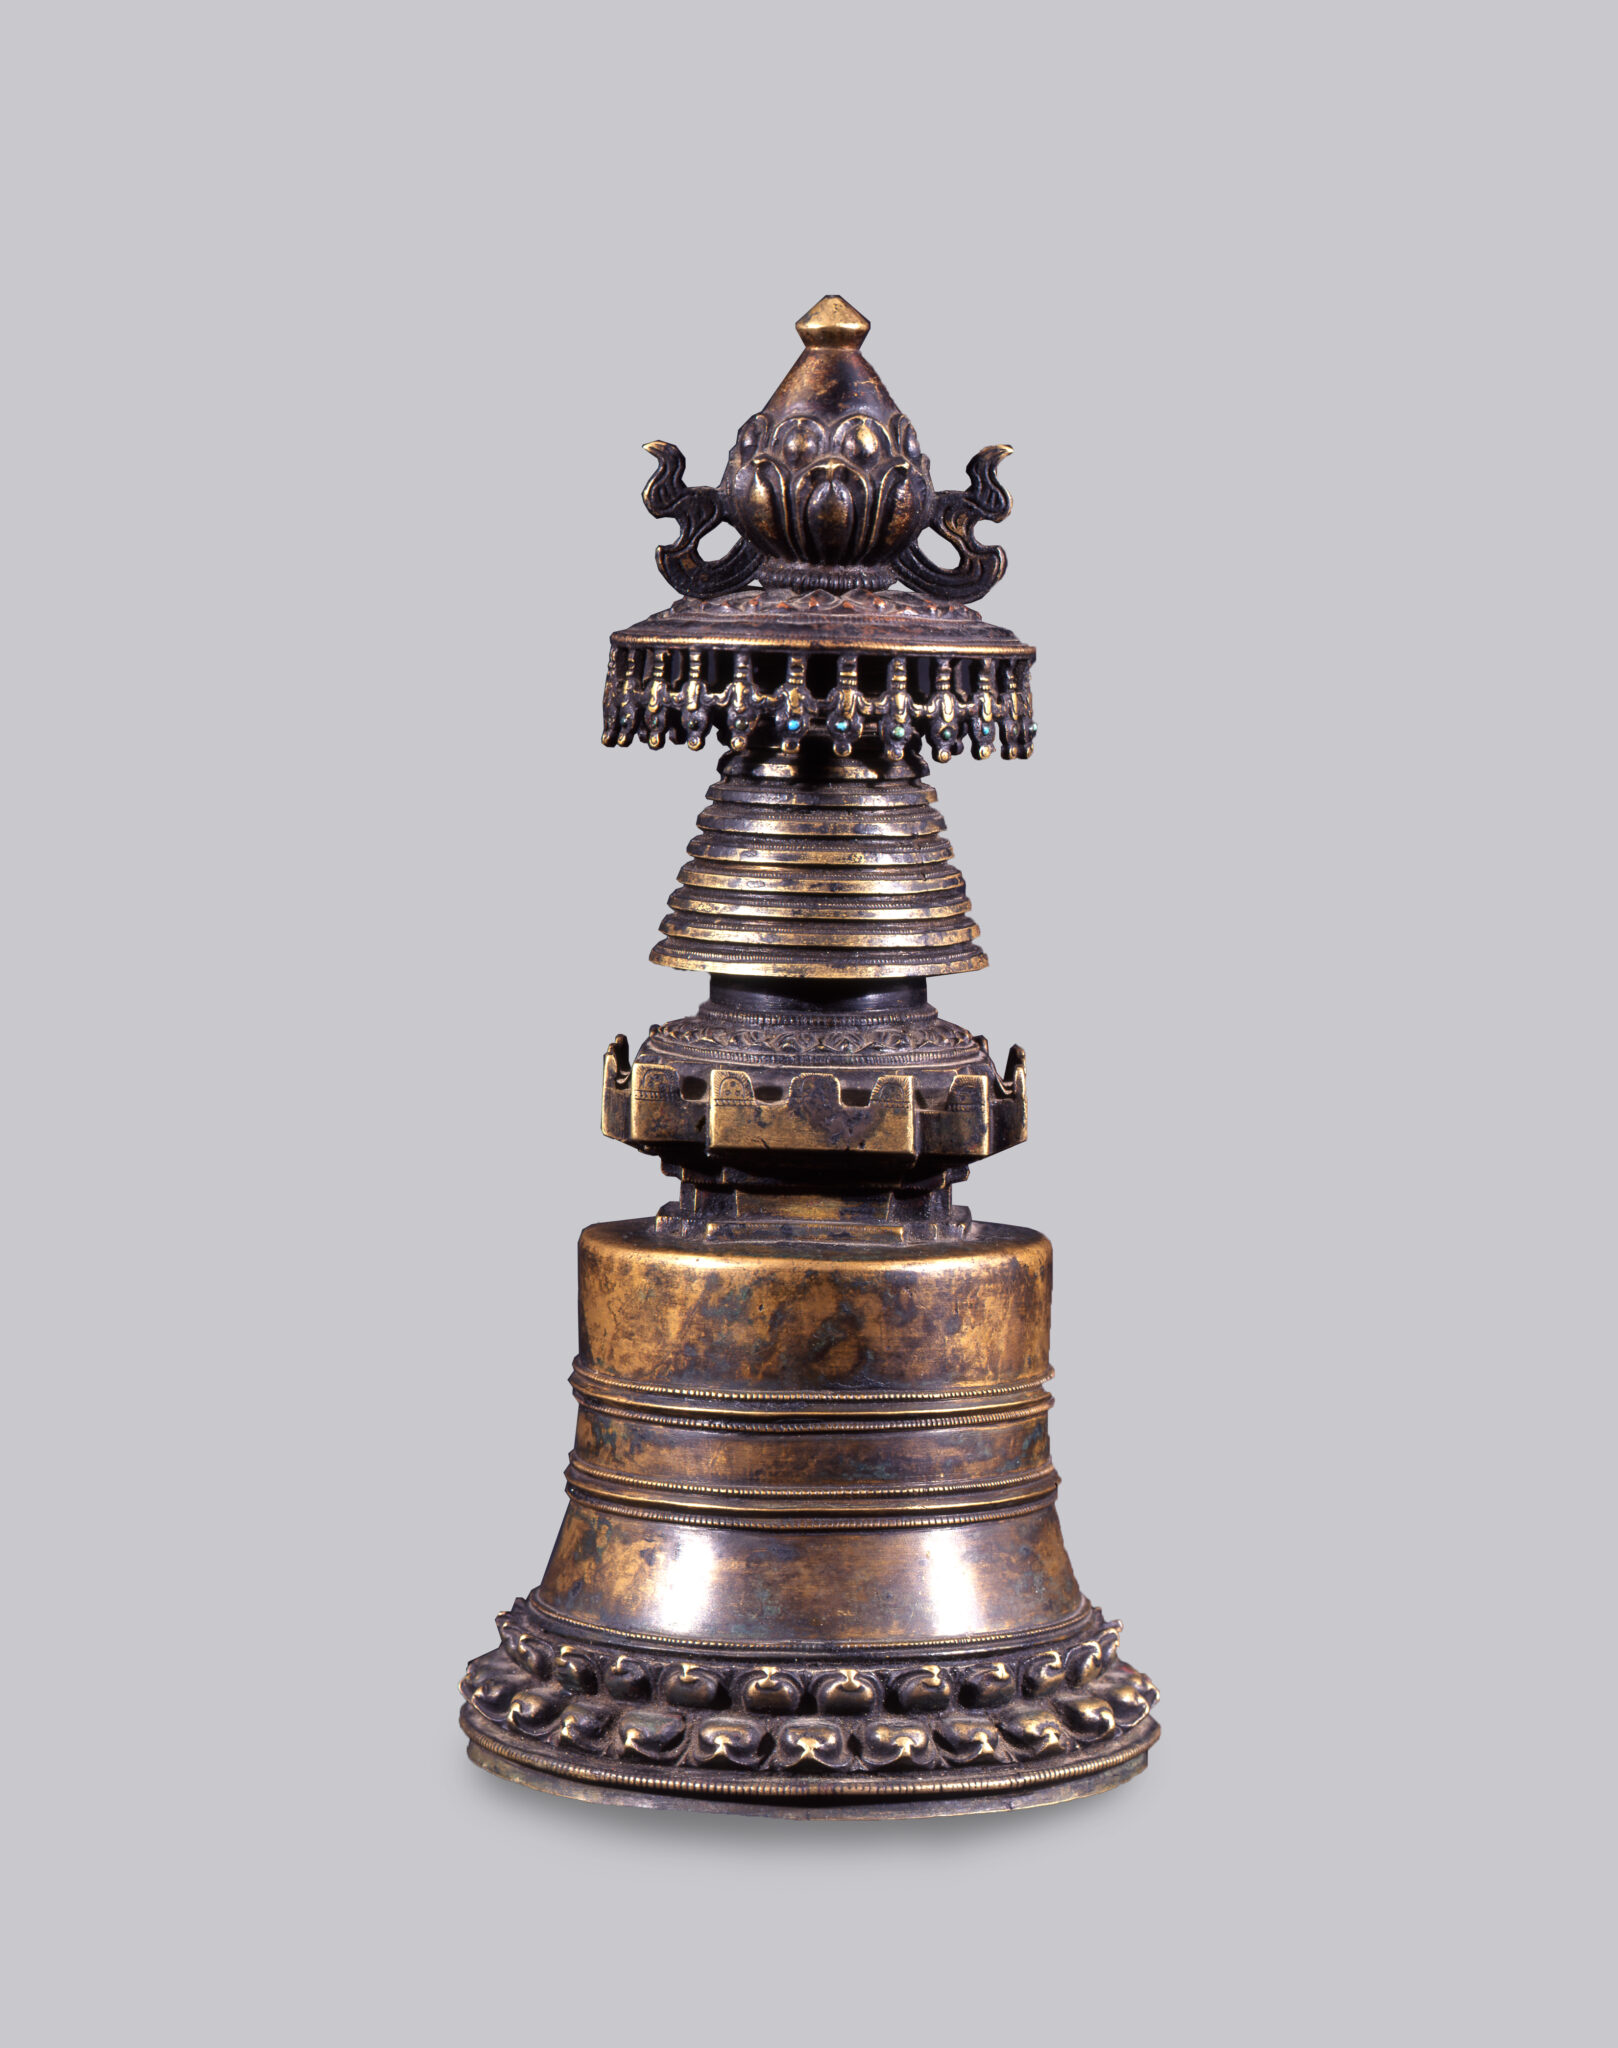 Mottled copper religious implement in stupa shape with canopy and lotus blossom at top